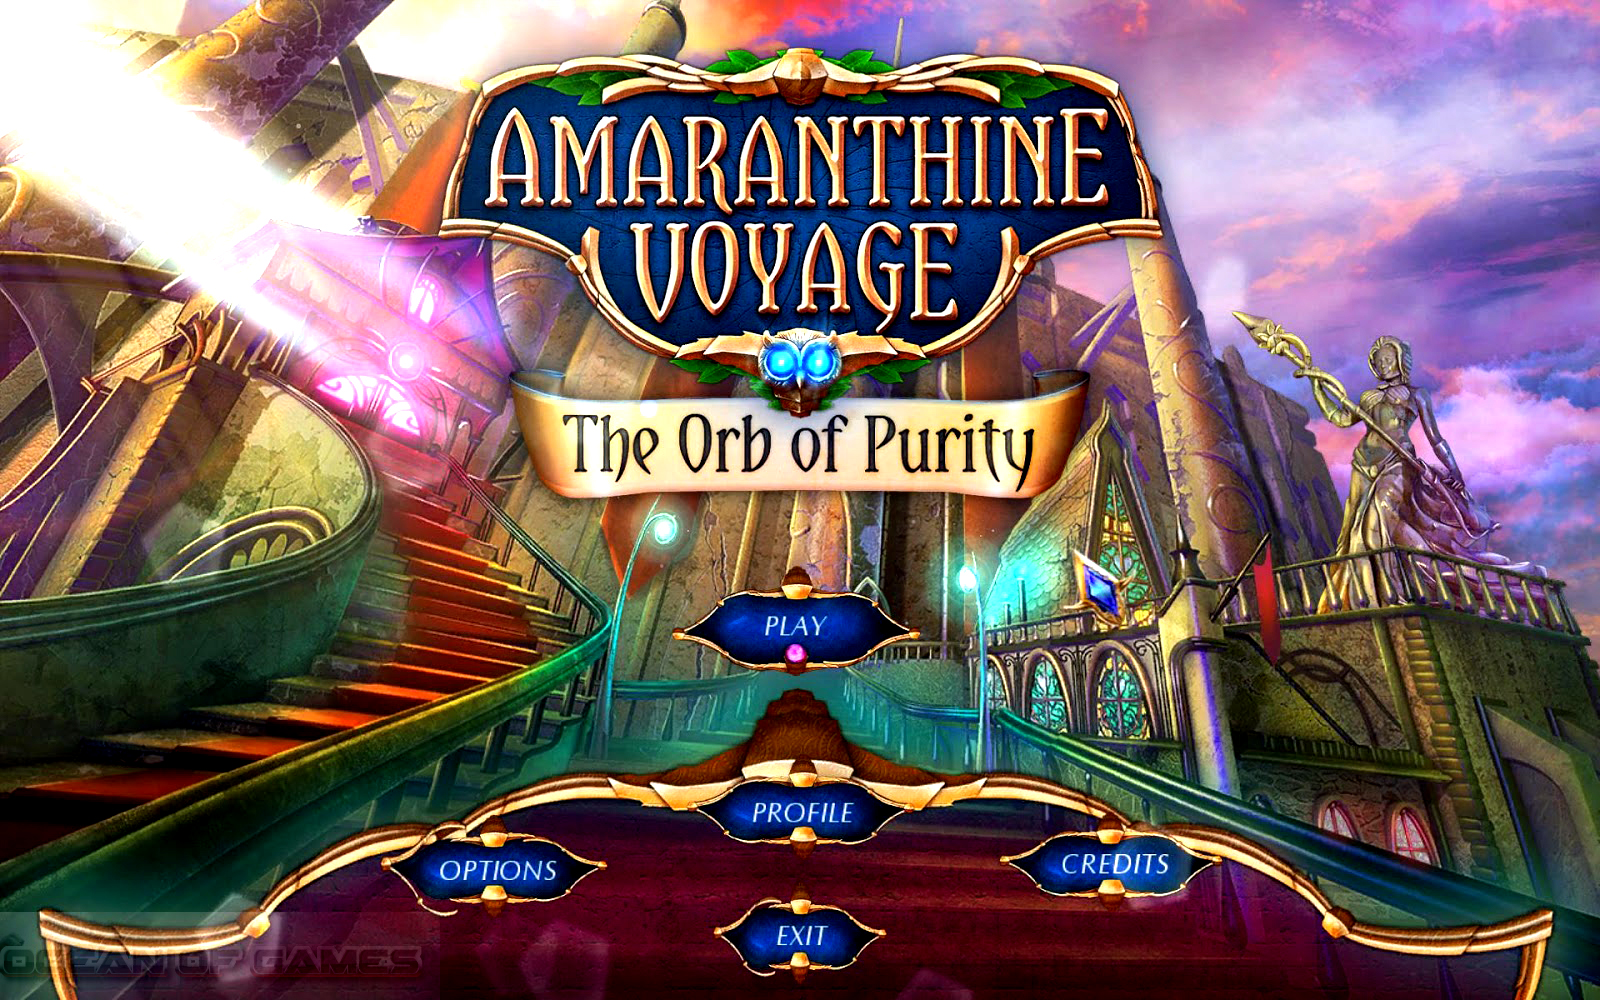 Amaranthine Voyage The Orb of Purity Free Download